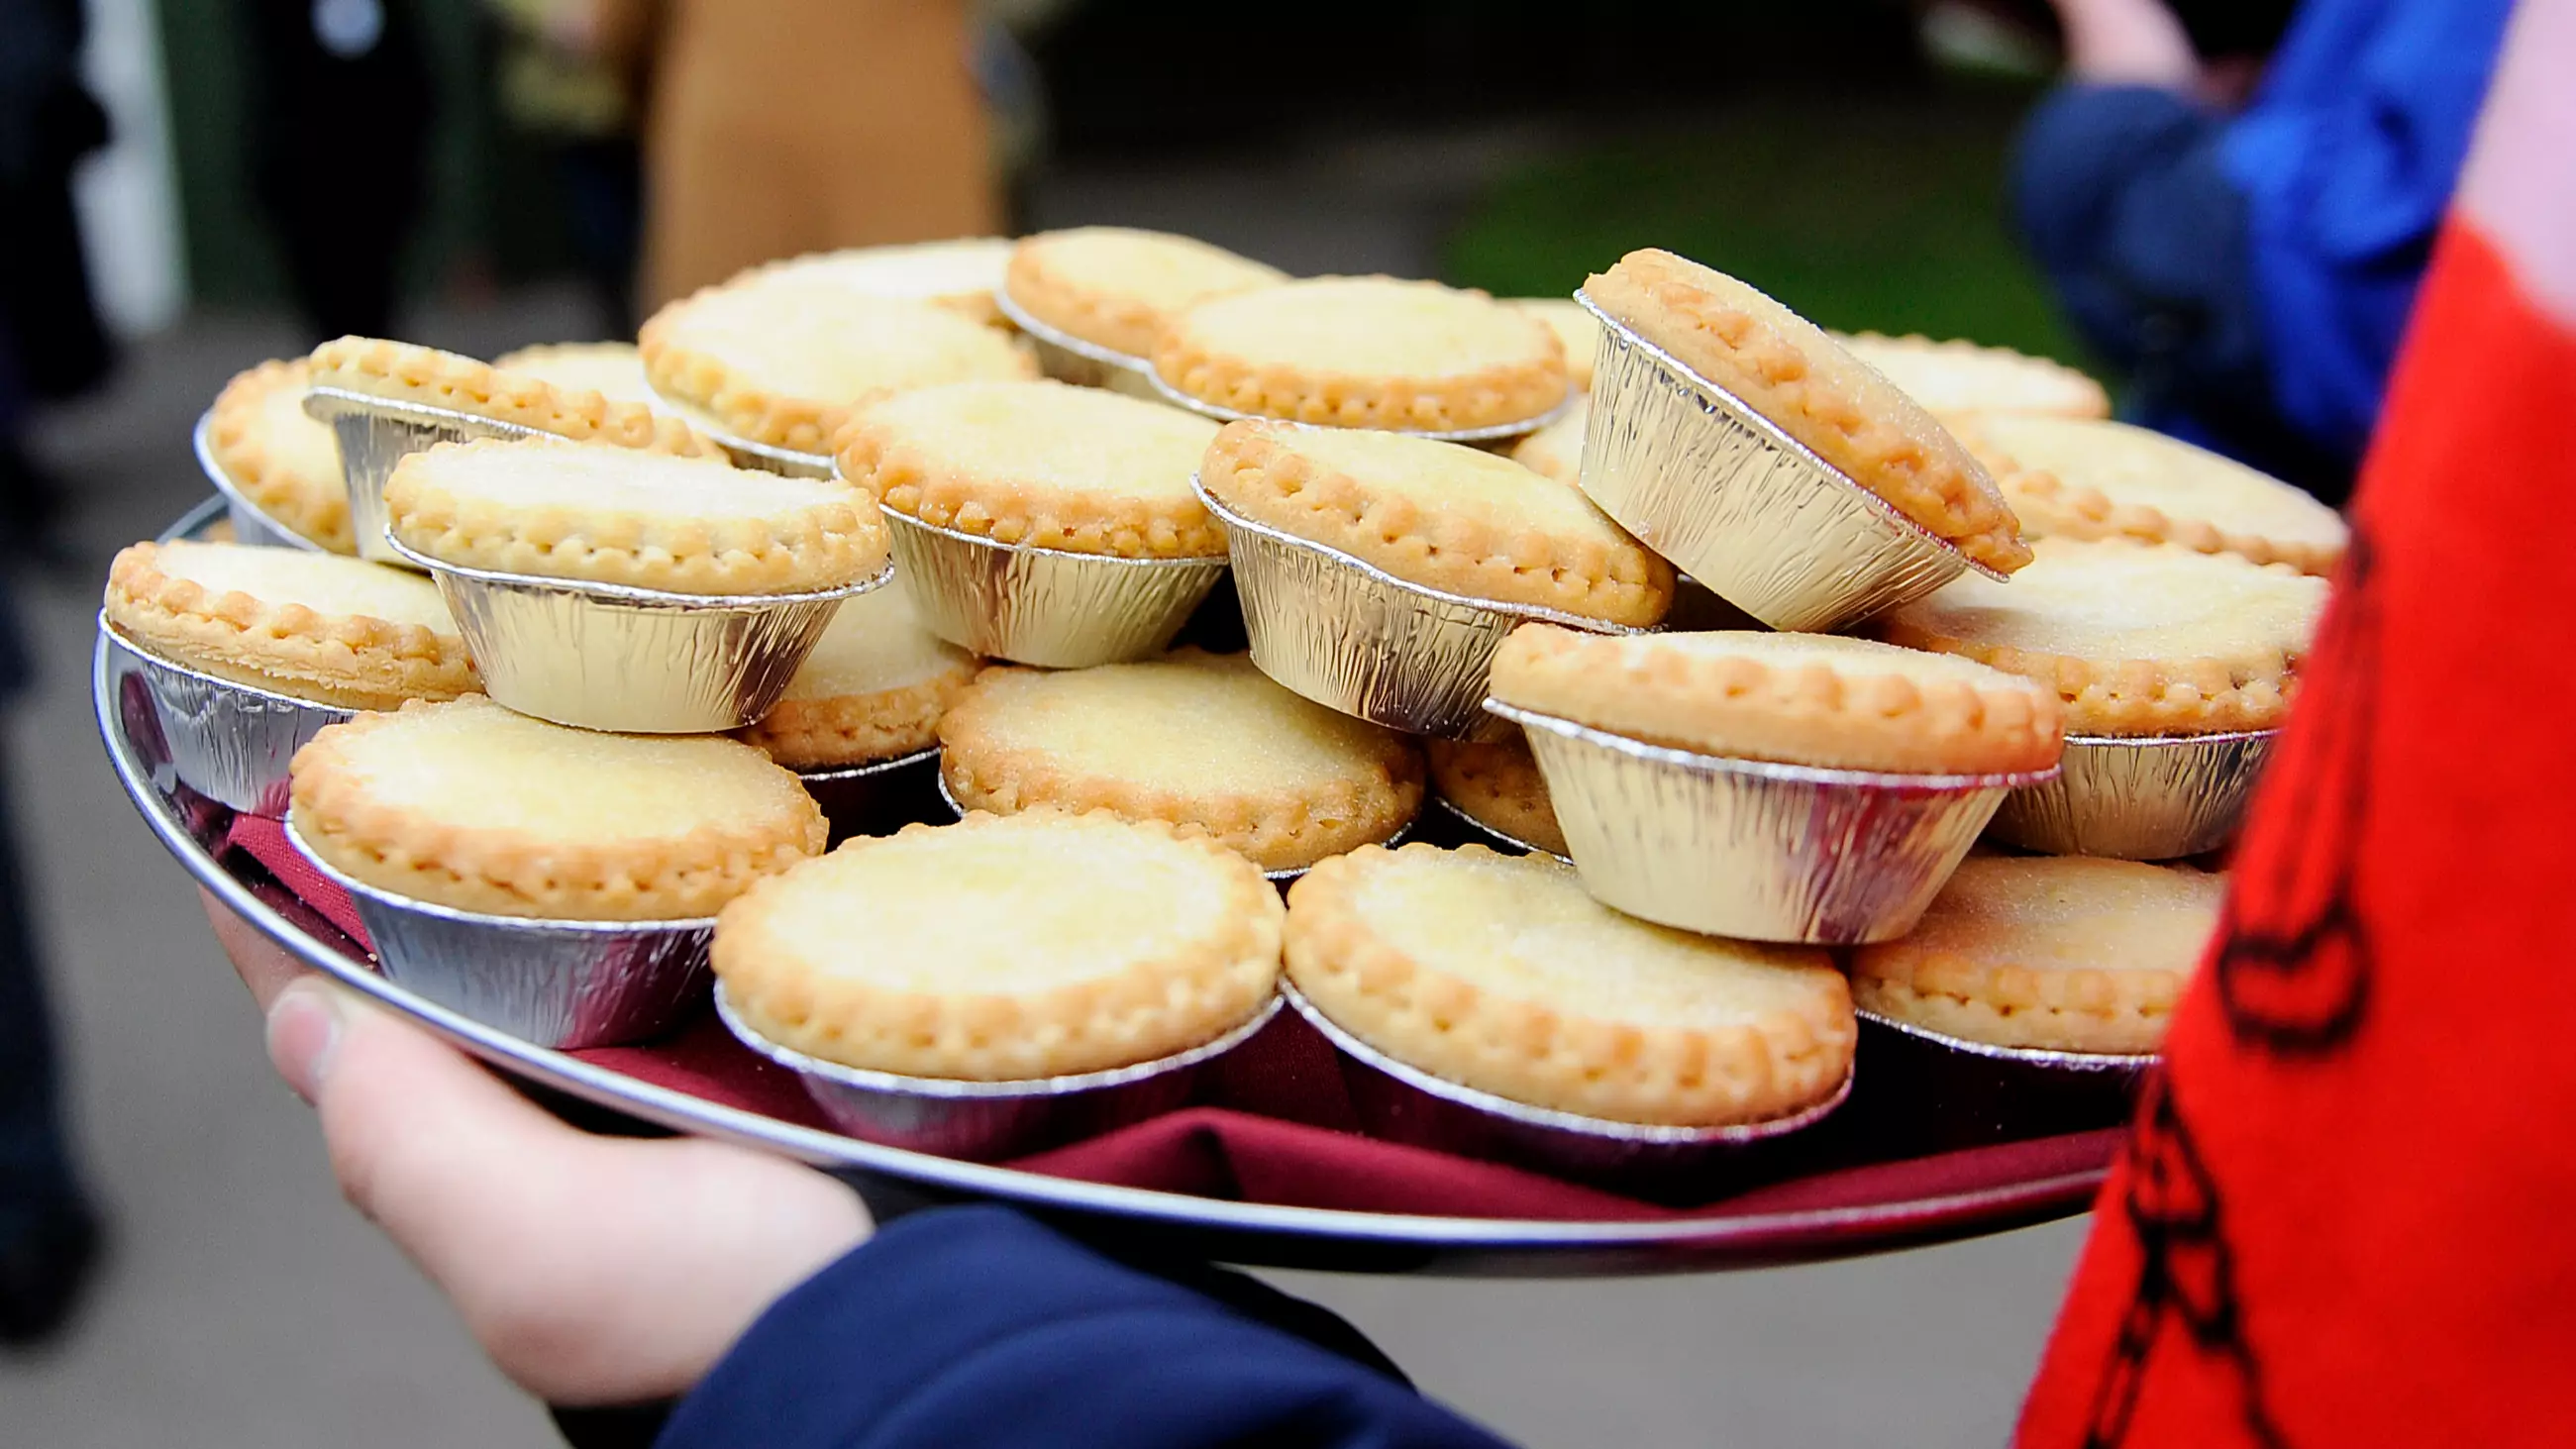 Half Of Brits Would Consider Eating Mince Pies For Breakfast And WTAF